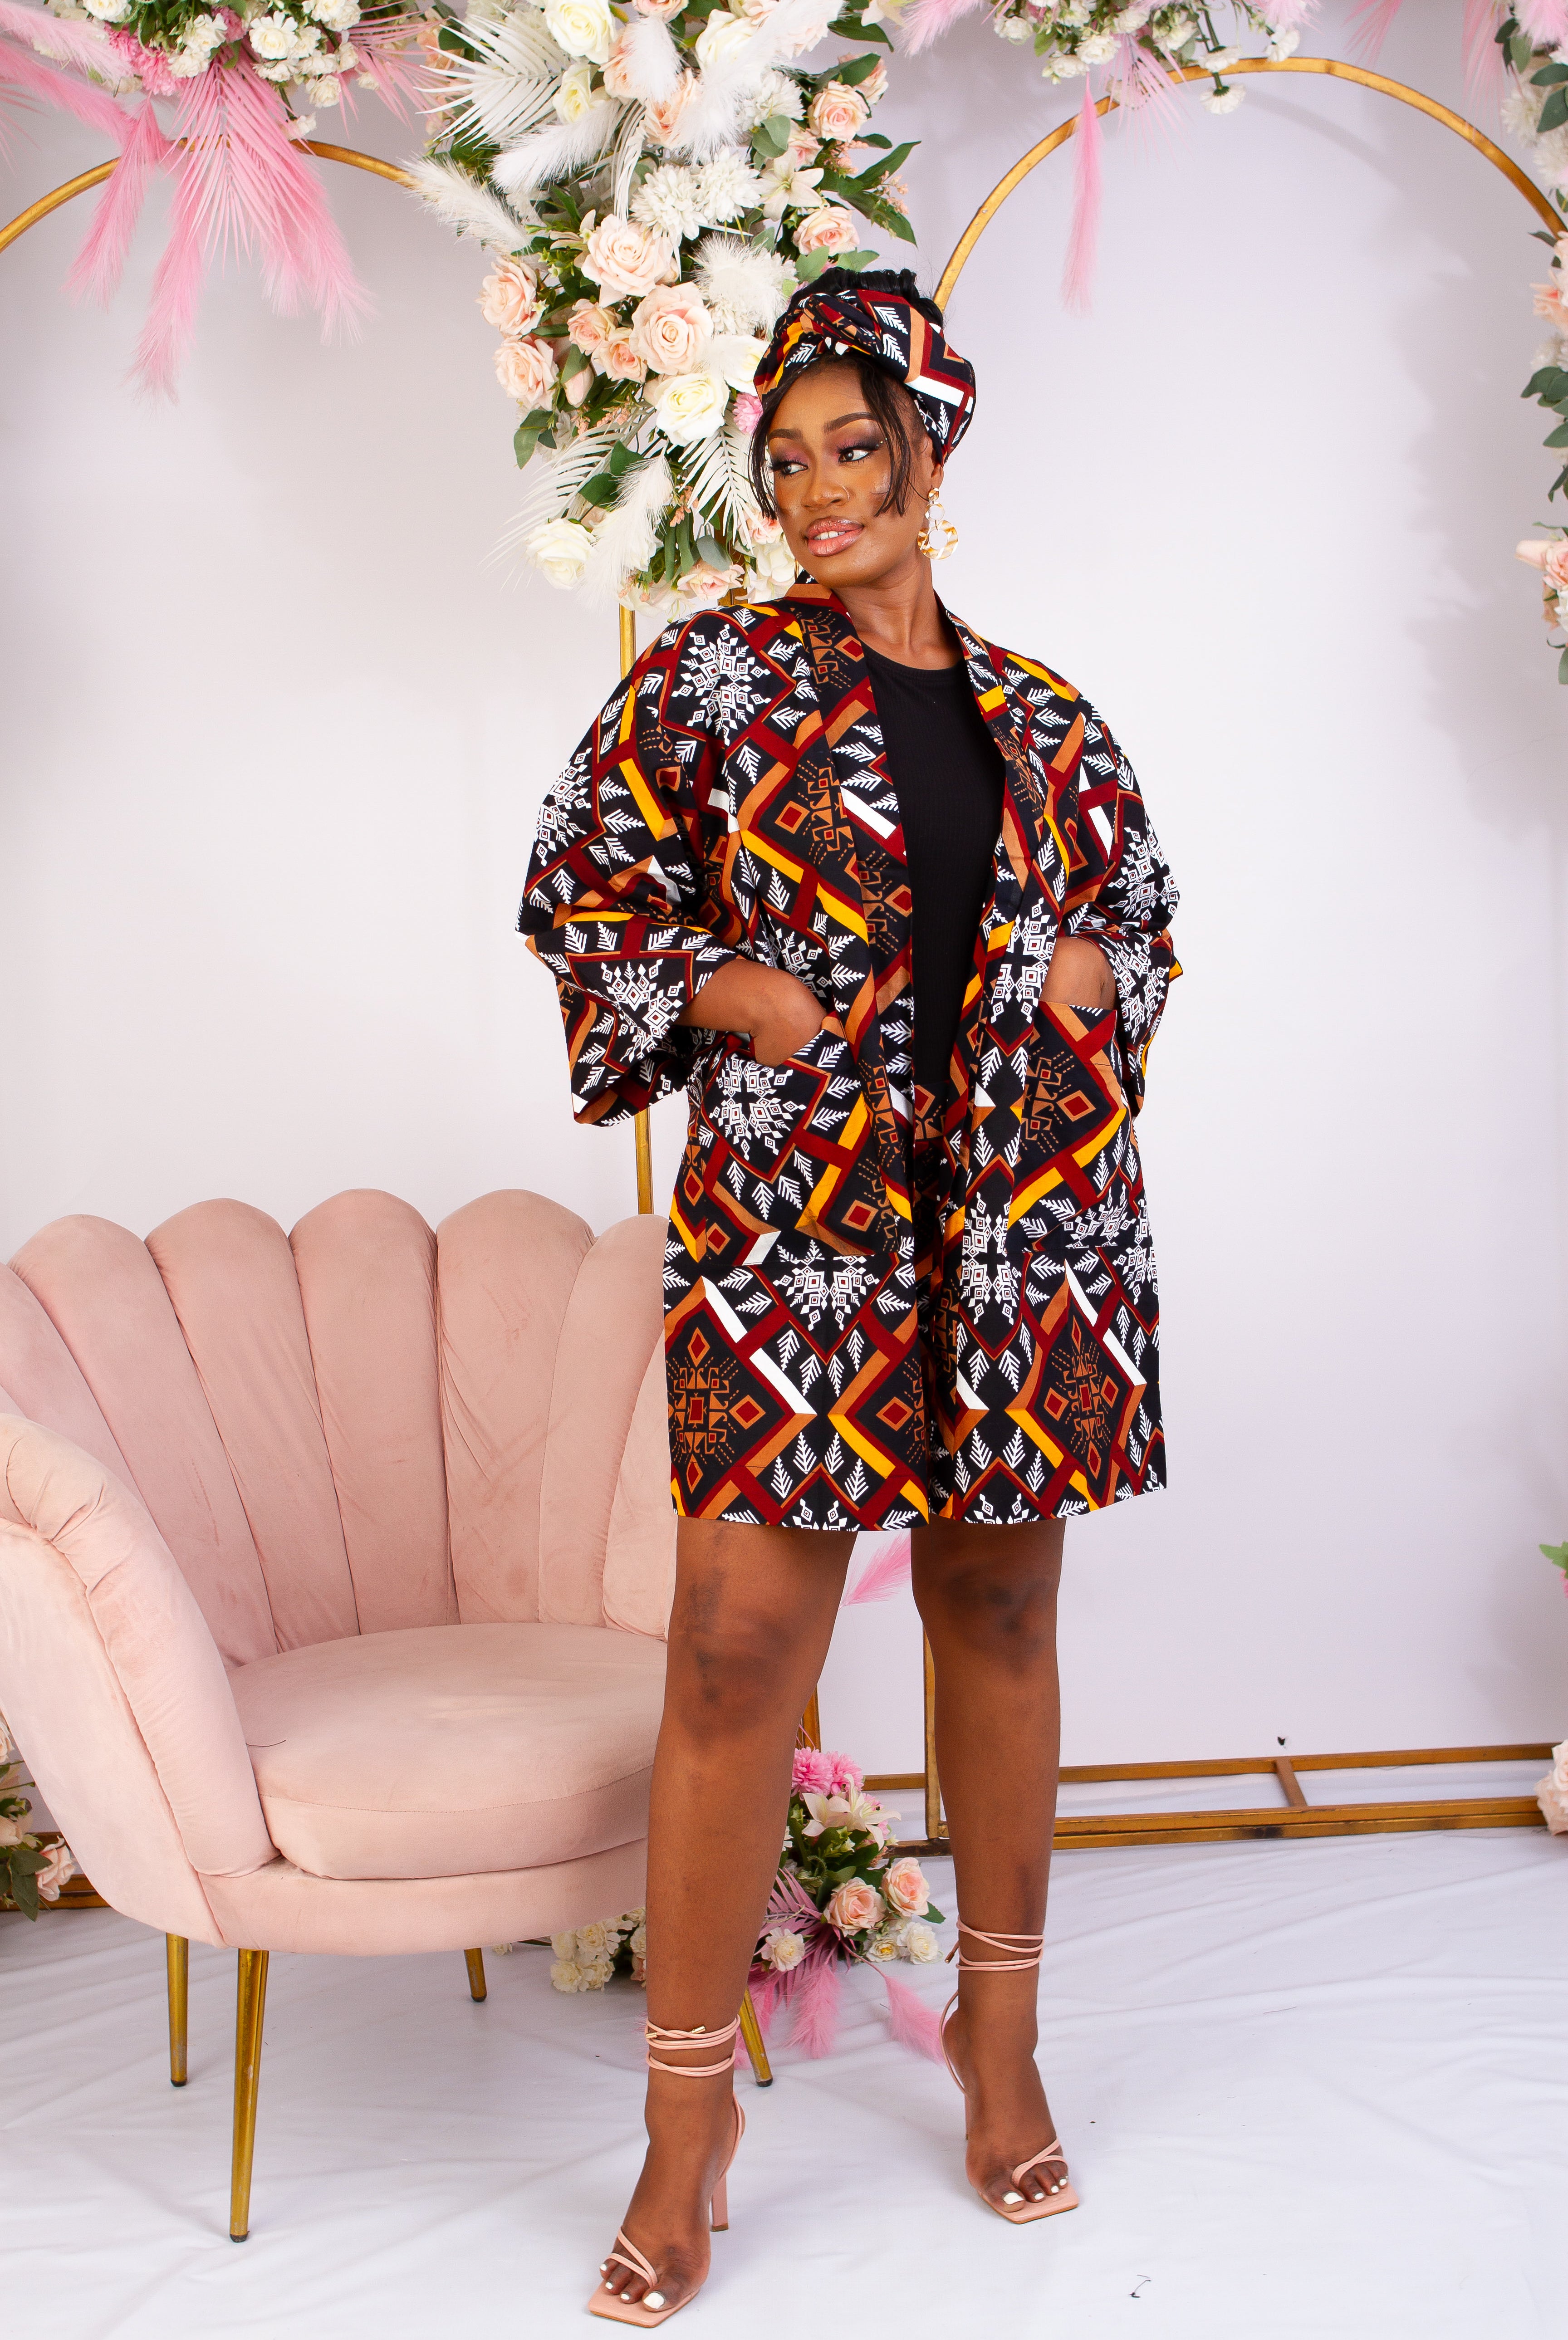 Discover trendy sustainable African apparel in the UK. Handmade African Print Kimono, African print coverups, outerwear for a day on the beach African print Jacket| Ankara jacket | Tribal prints kimono | Floral African print clothing | Cotton Blazer | African print workwear | African clothing UK | Black-owned fashion brand | UK Based African Fashion Brand